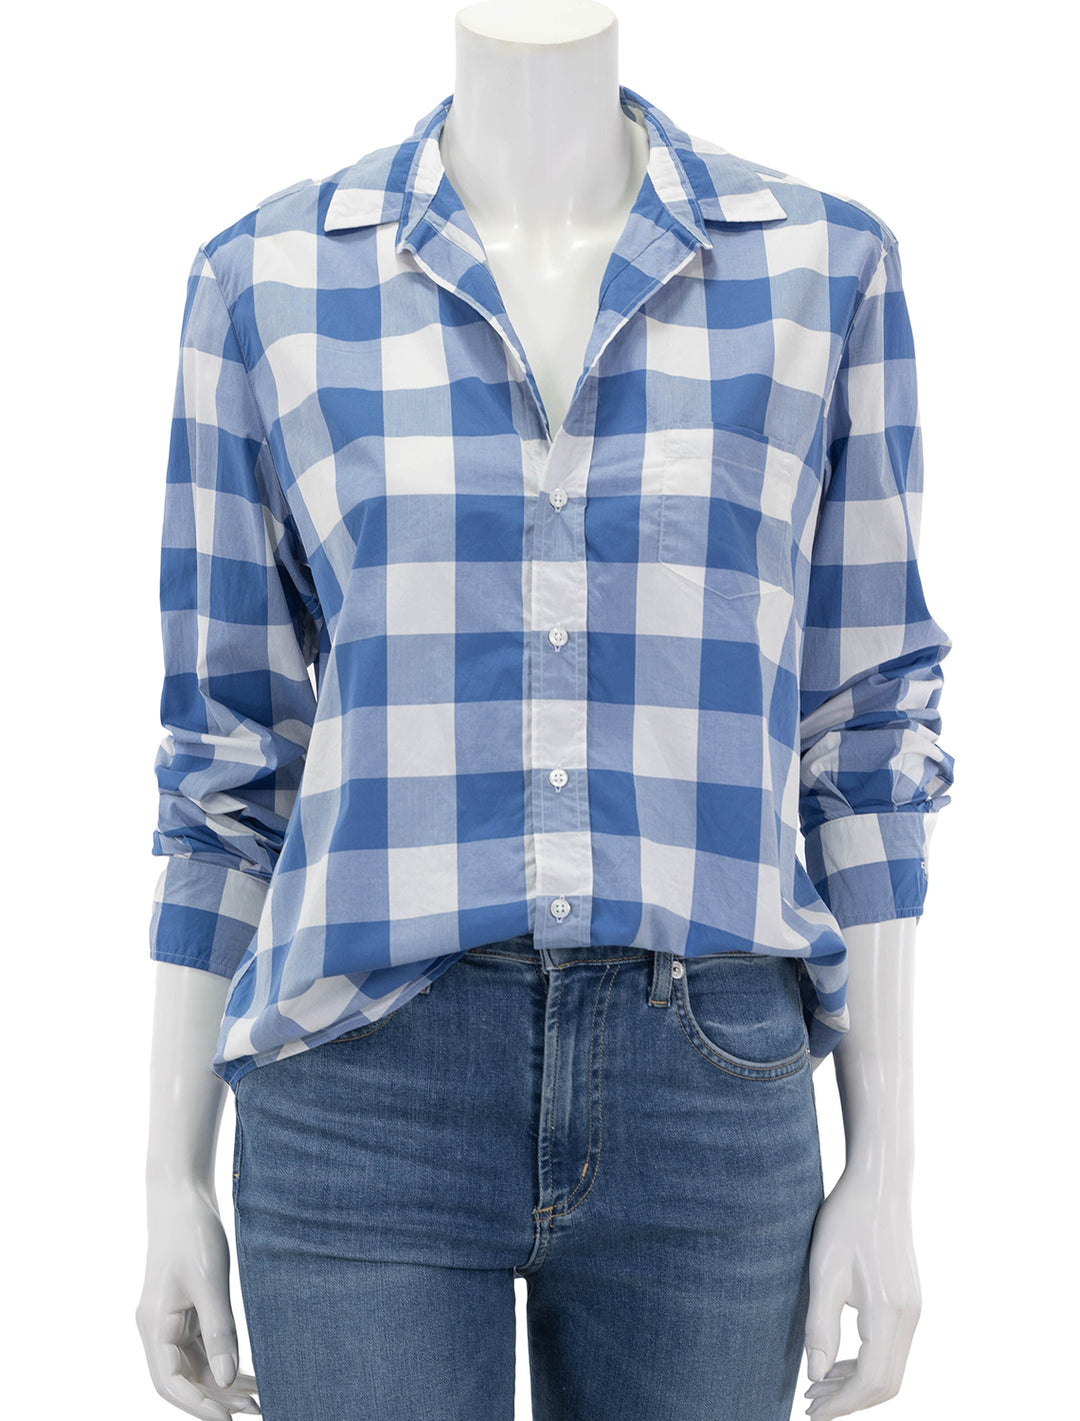 Front view of Frank & Eileen's eileen in x large blue white check.